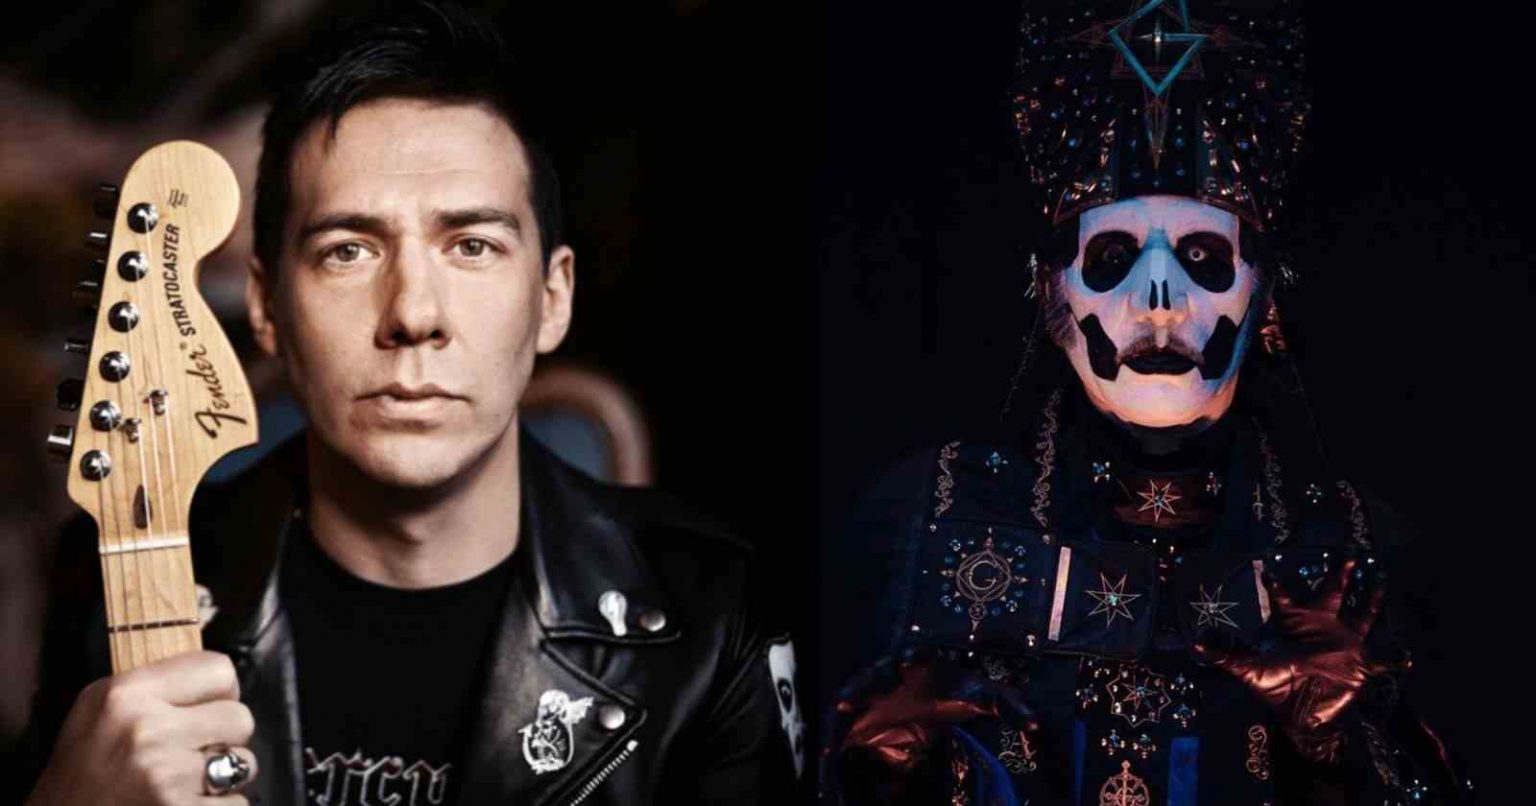 Tobias Forge Says Ghost Will Record A New Album